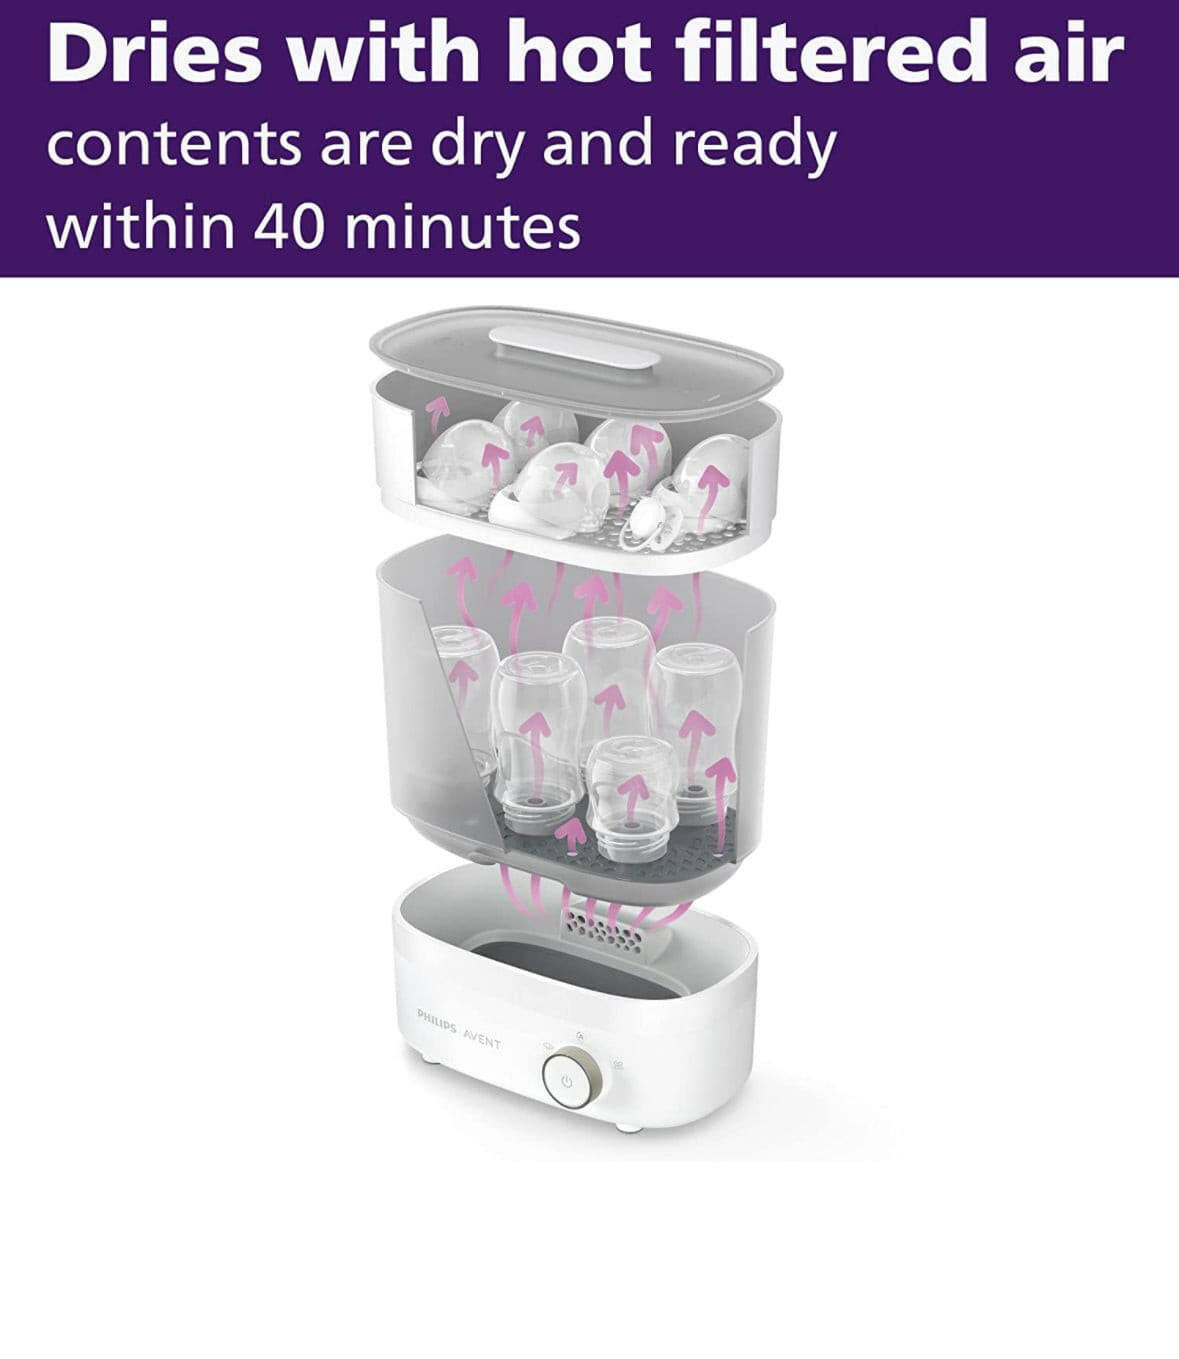 Philips AVENT Baby Bottle Sterilizer with Dryer.